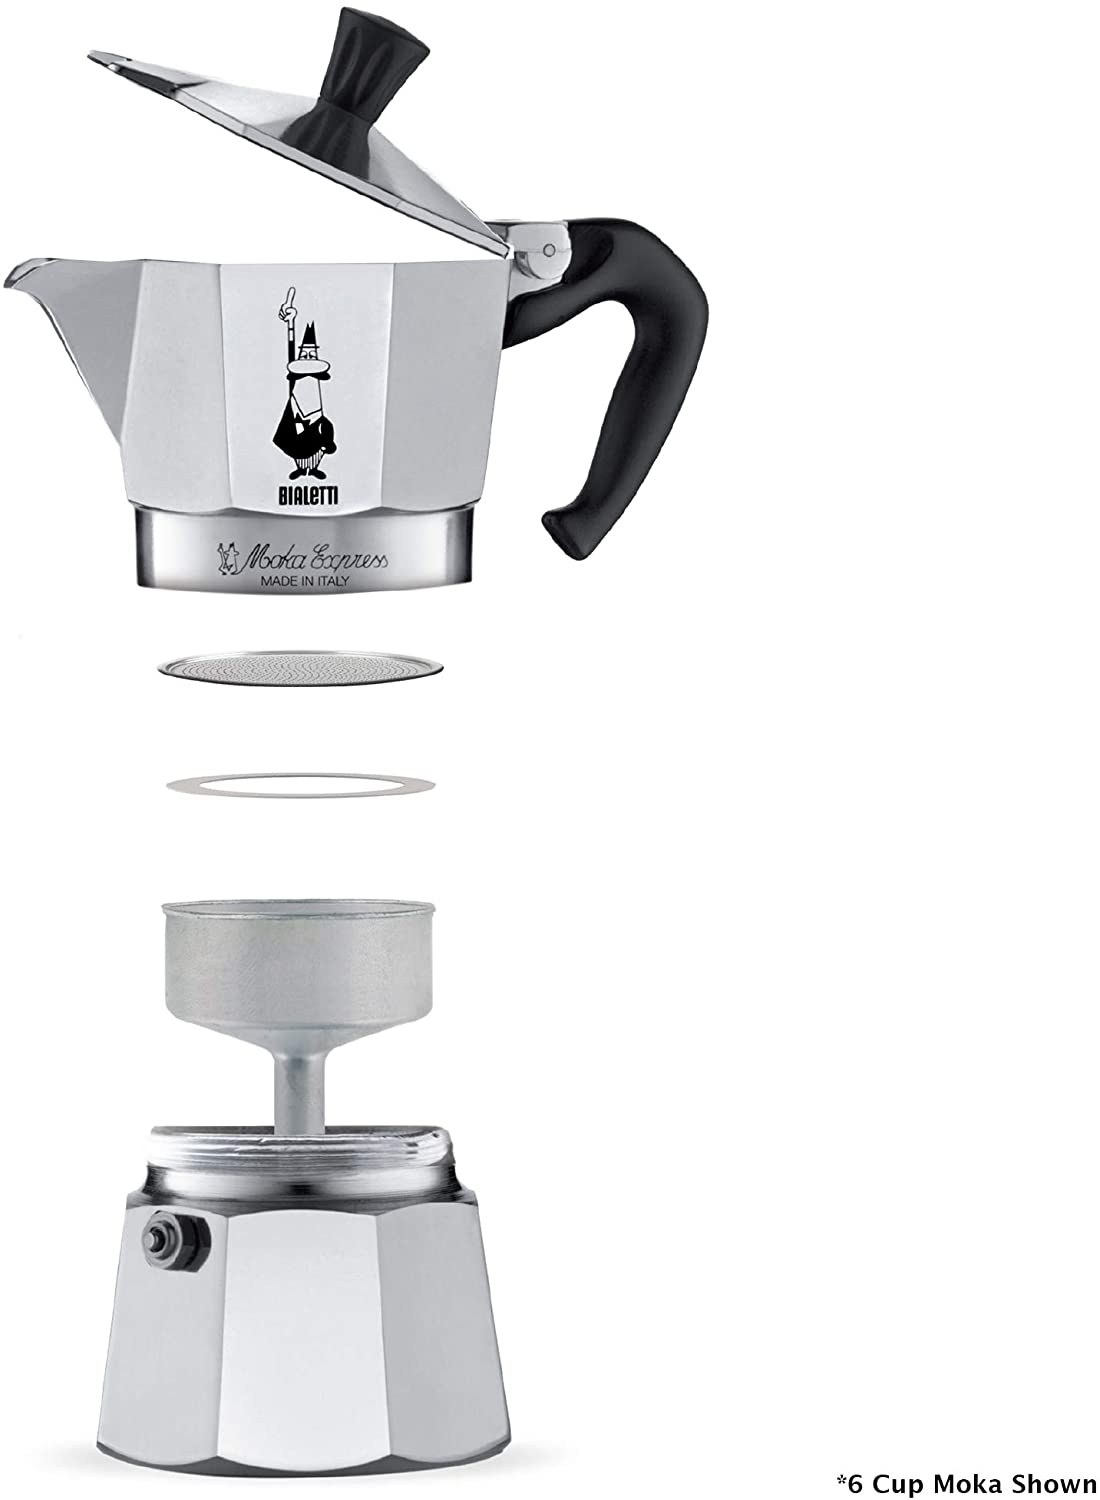 Bialetti New Moka Induction Coffee Maker Moka Pot, 6 Cups, 280 ml,  Aluminium, Red, Compatible with Induction pan and Gas stove: Italian Made